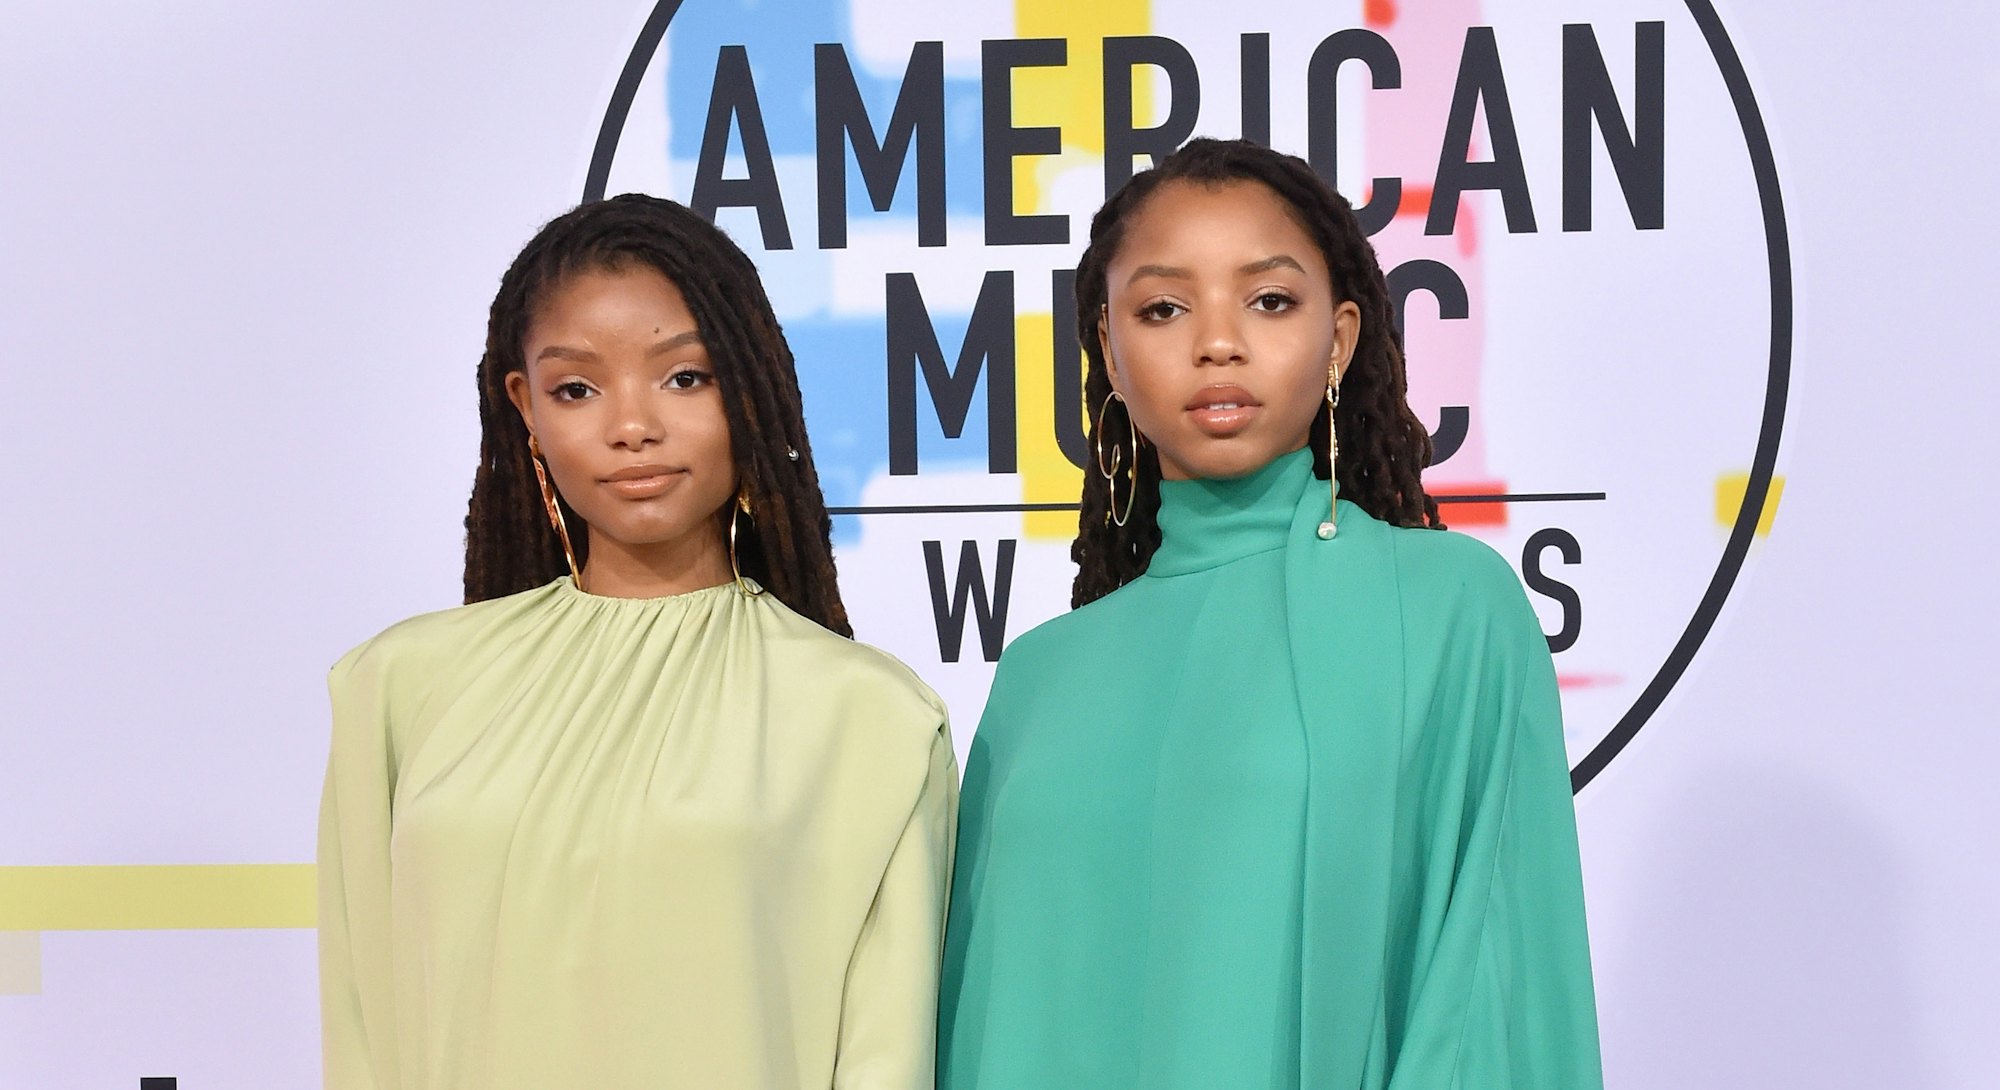 Chloe x Halle at the 2018 American Music Awards